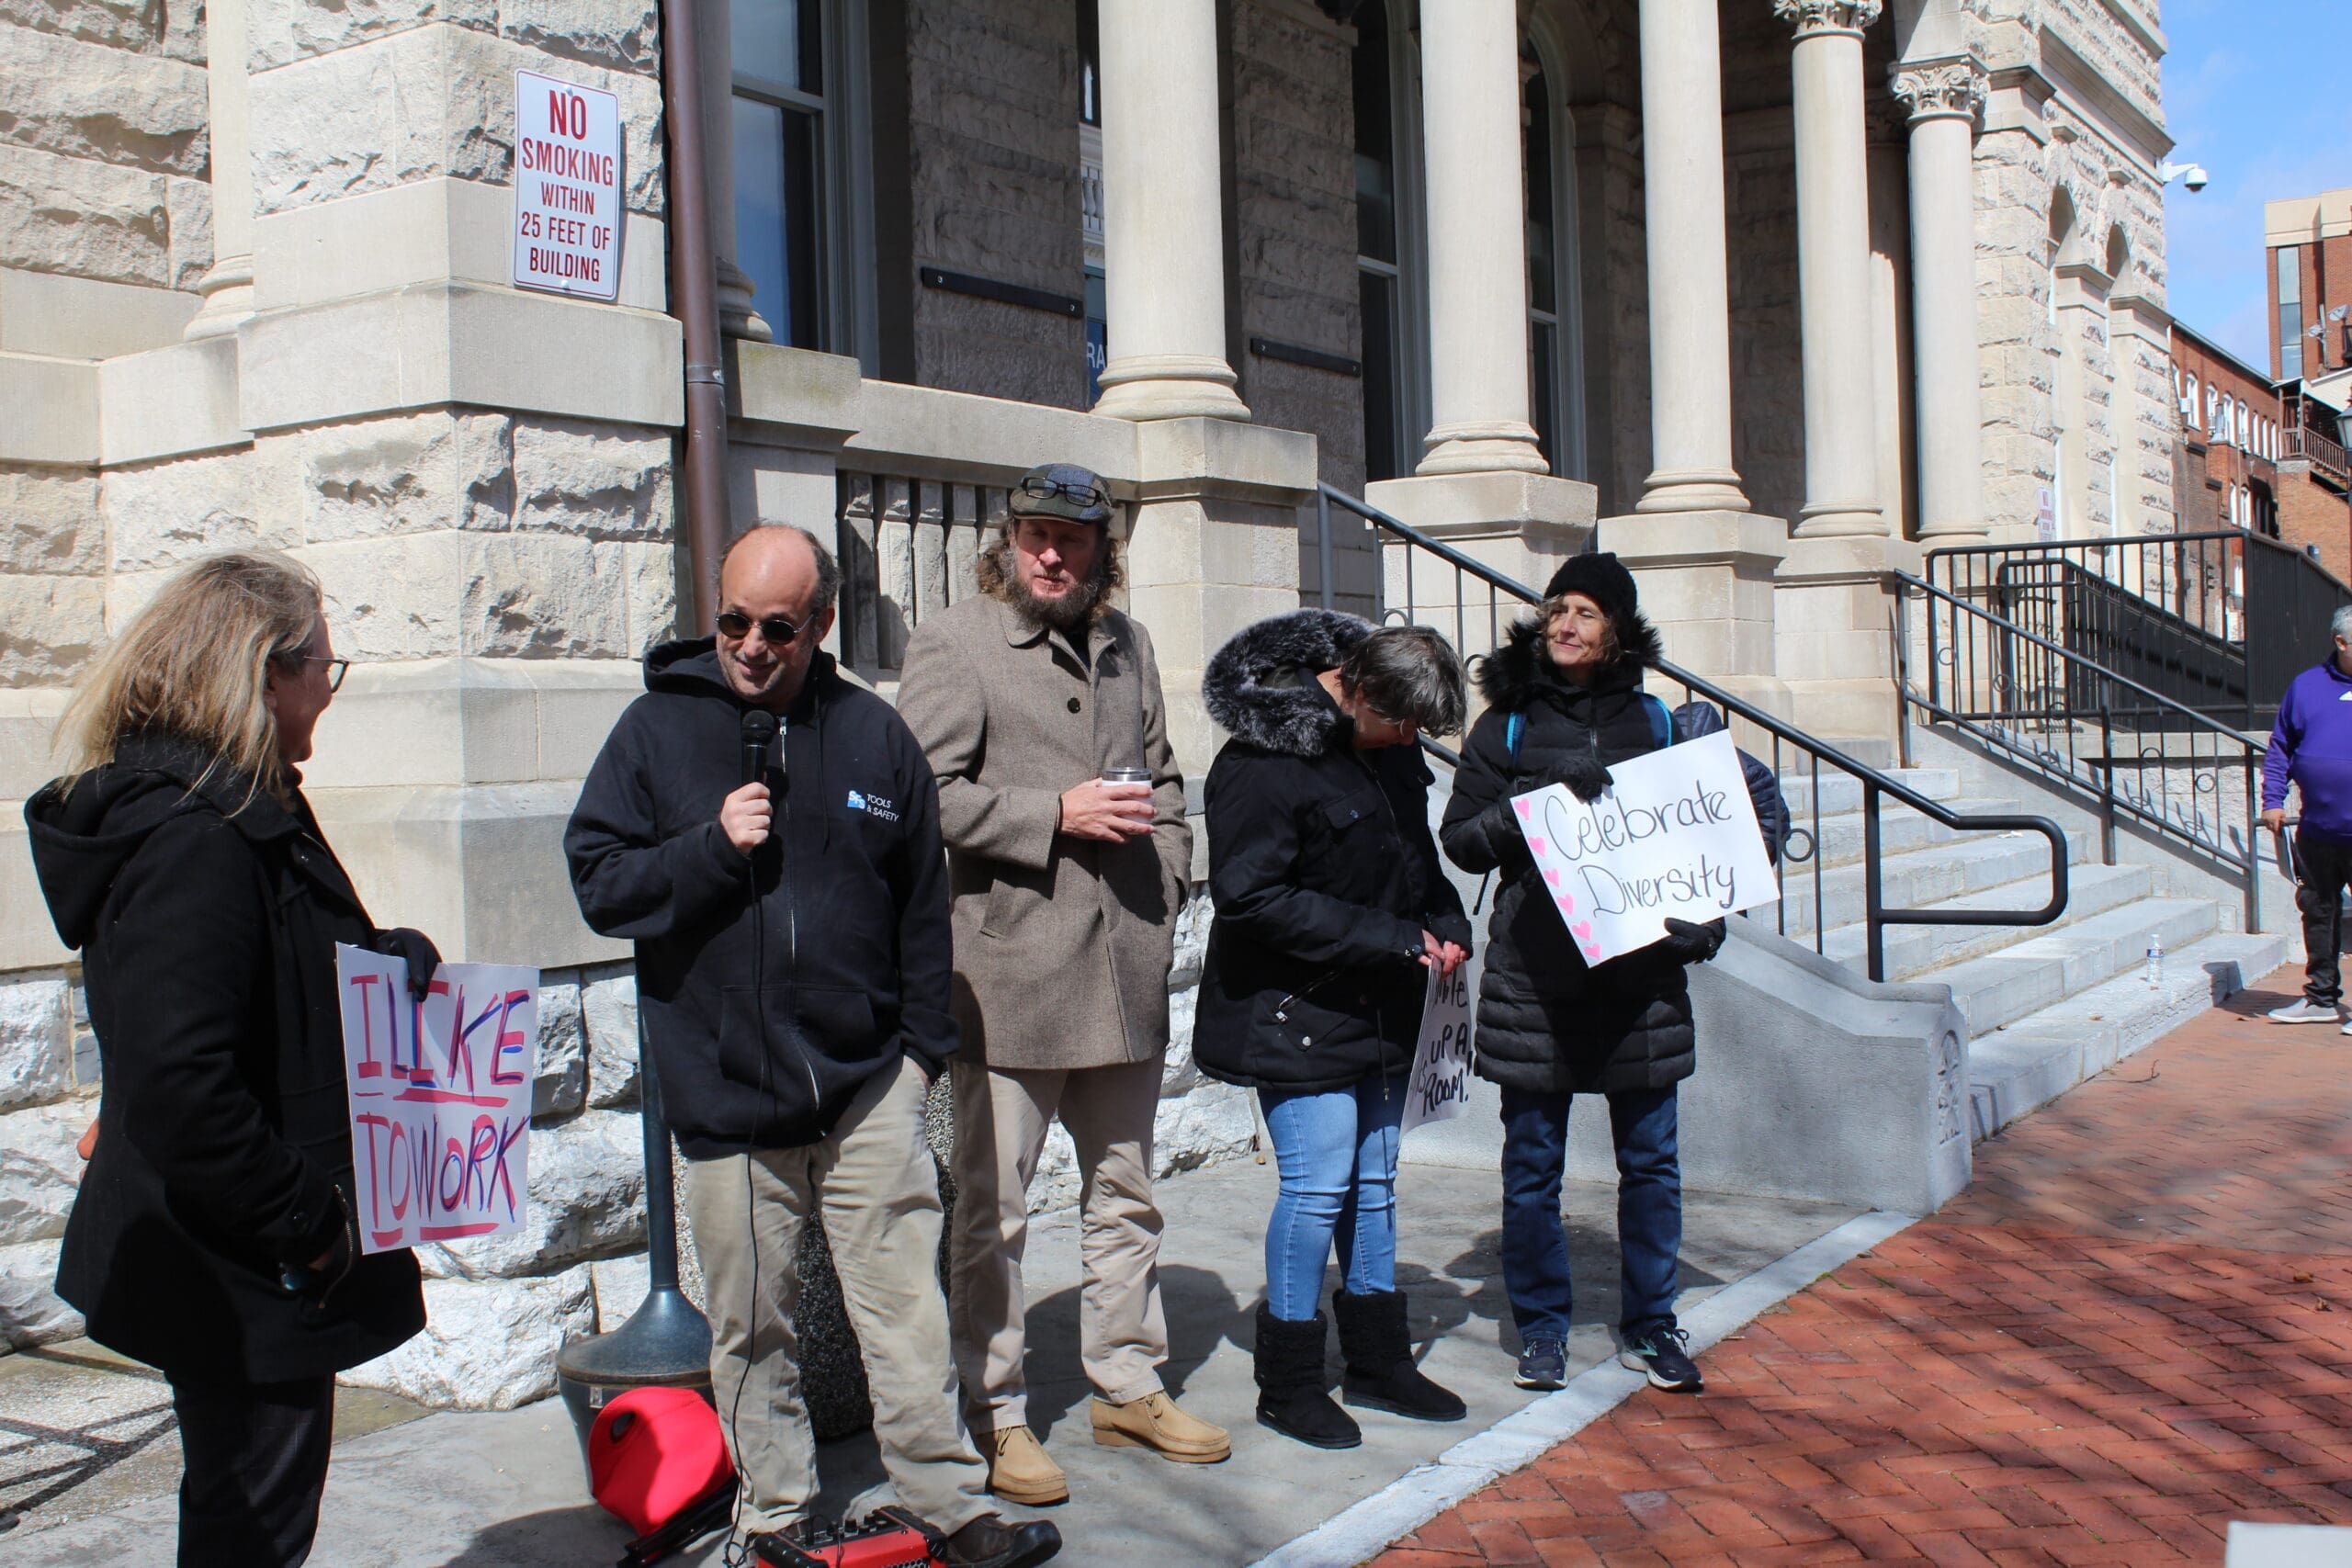 a group of 5 people standing in front of the Rockingham County Court House. One man is speaking in a microphone.